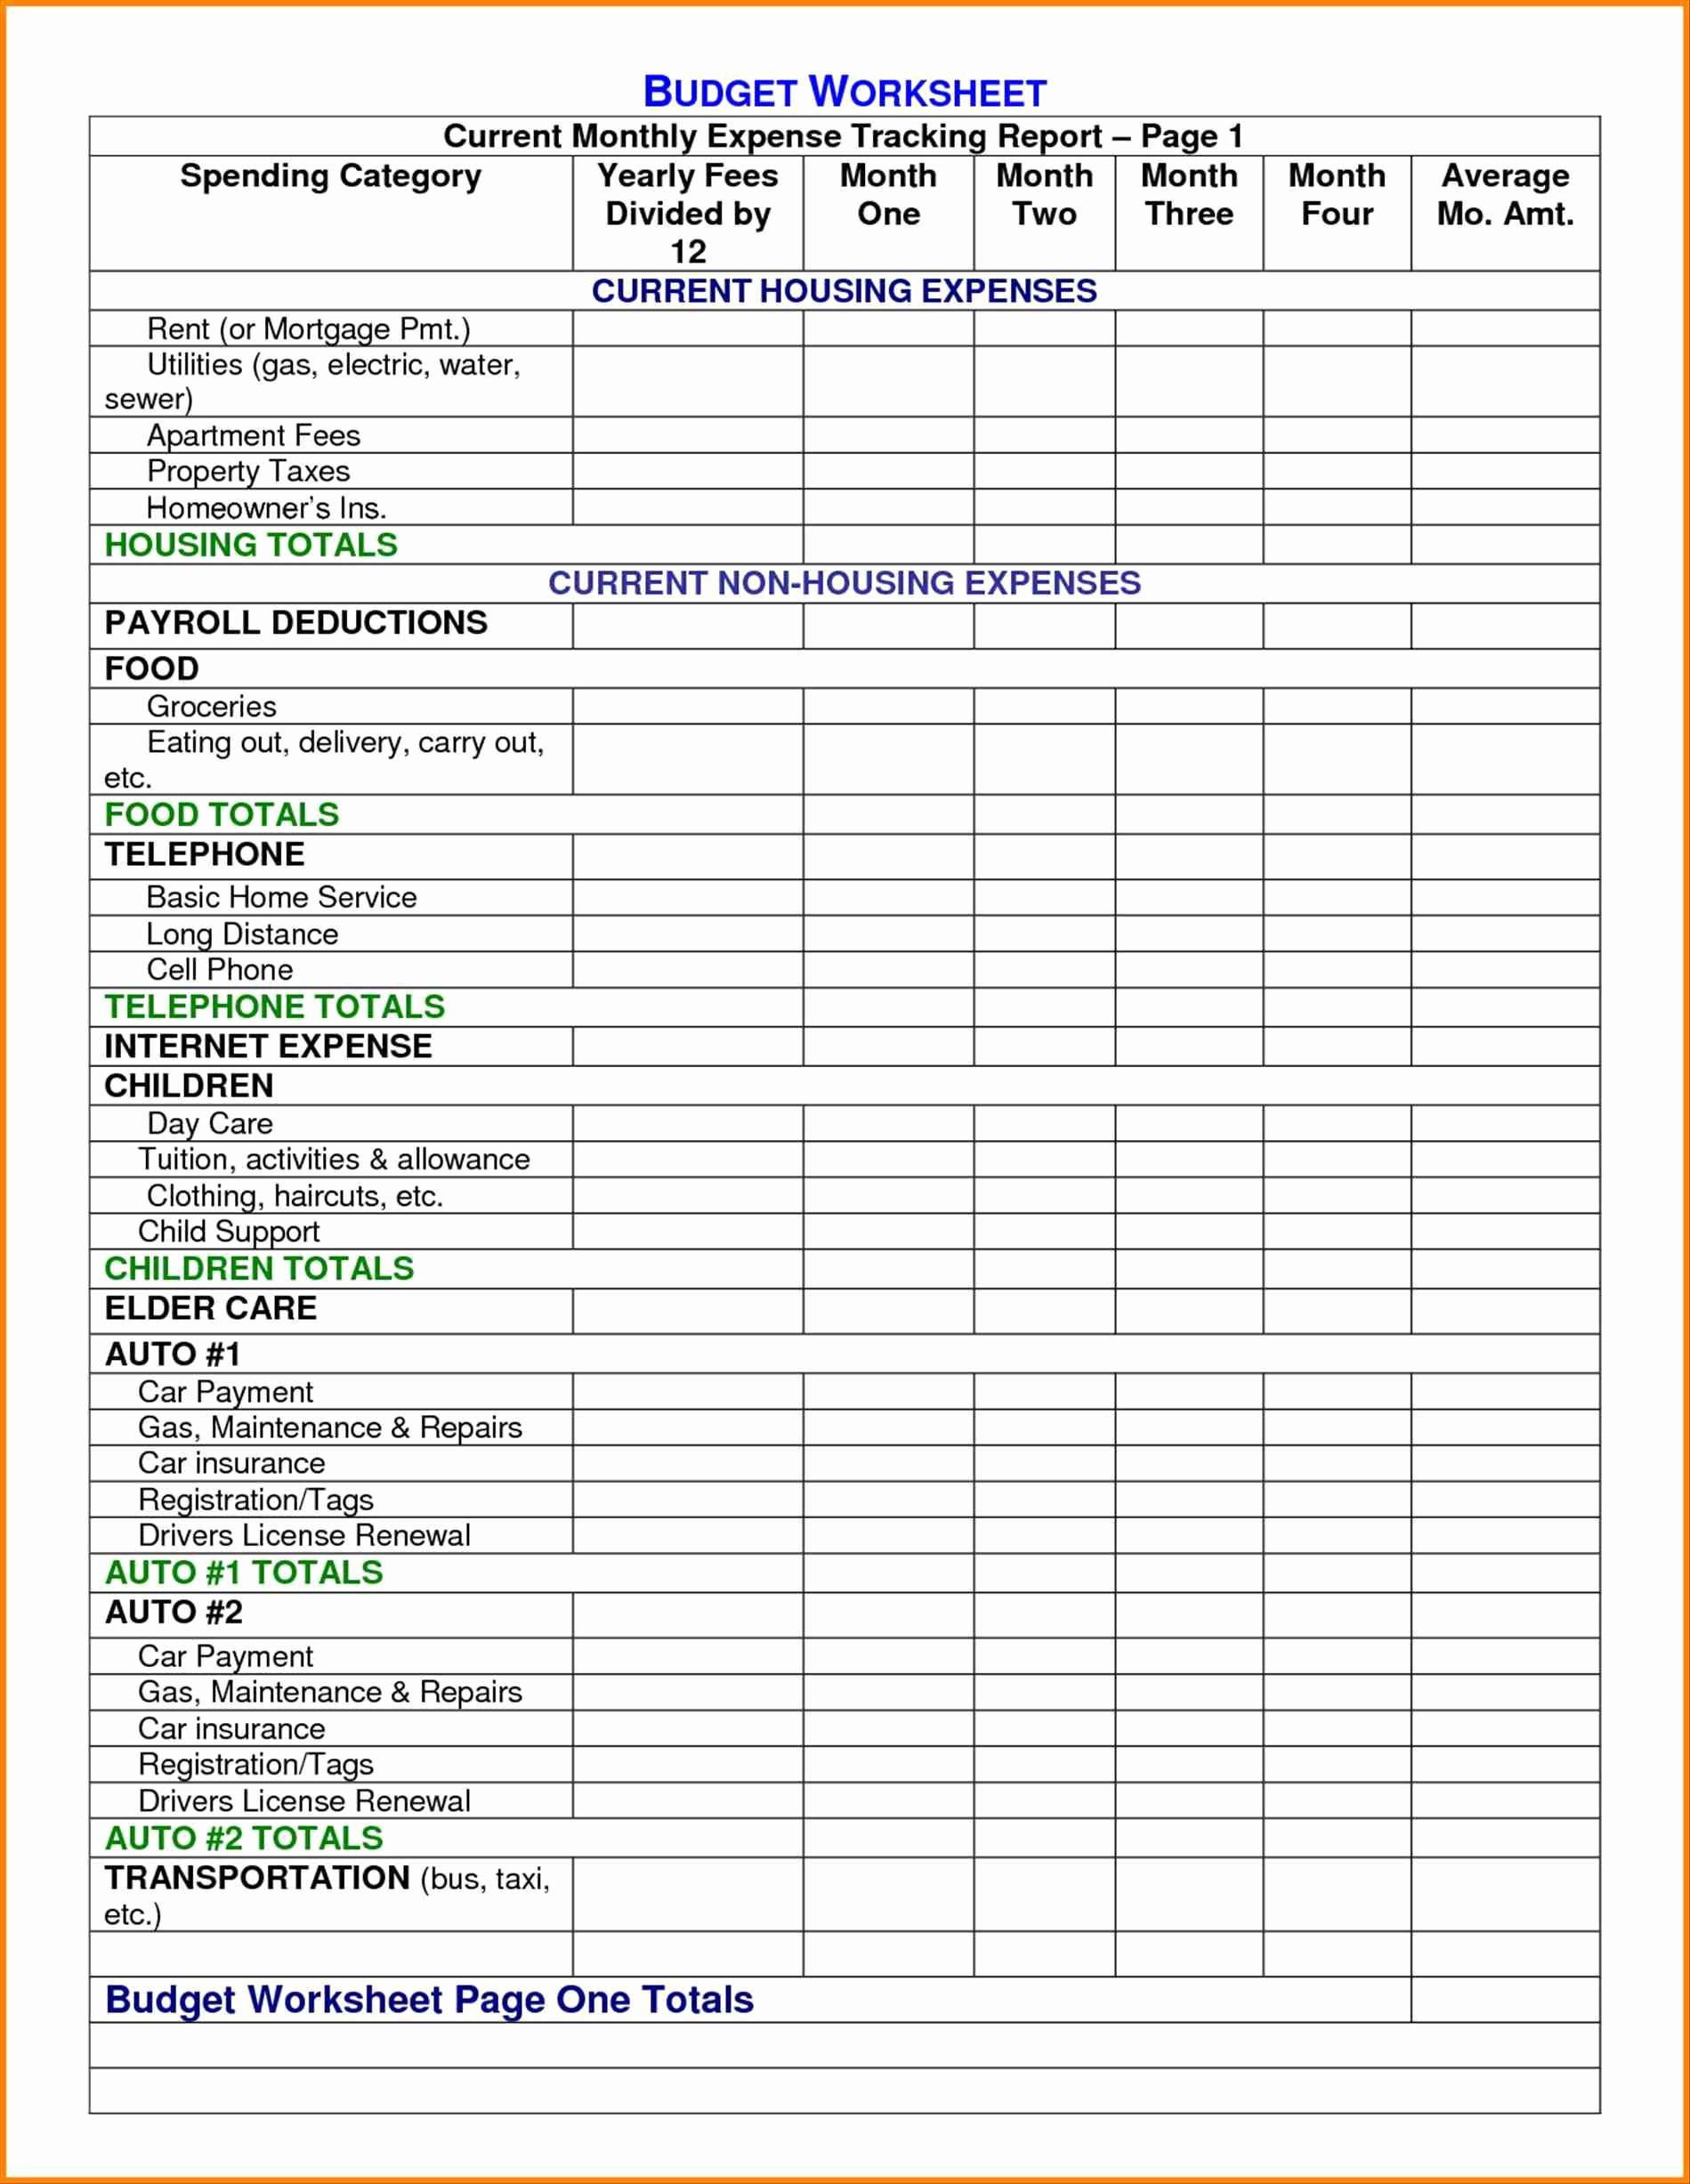 Excel Accounting Templates For Small Businesses Best Excel To Basic Accounting Template For Small Business